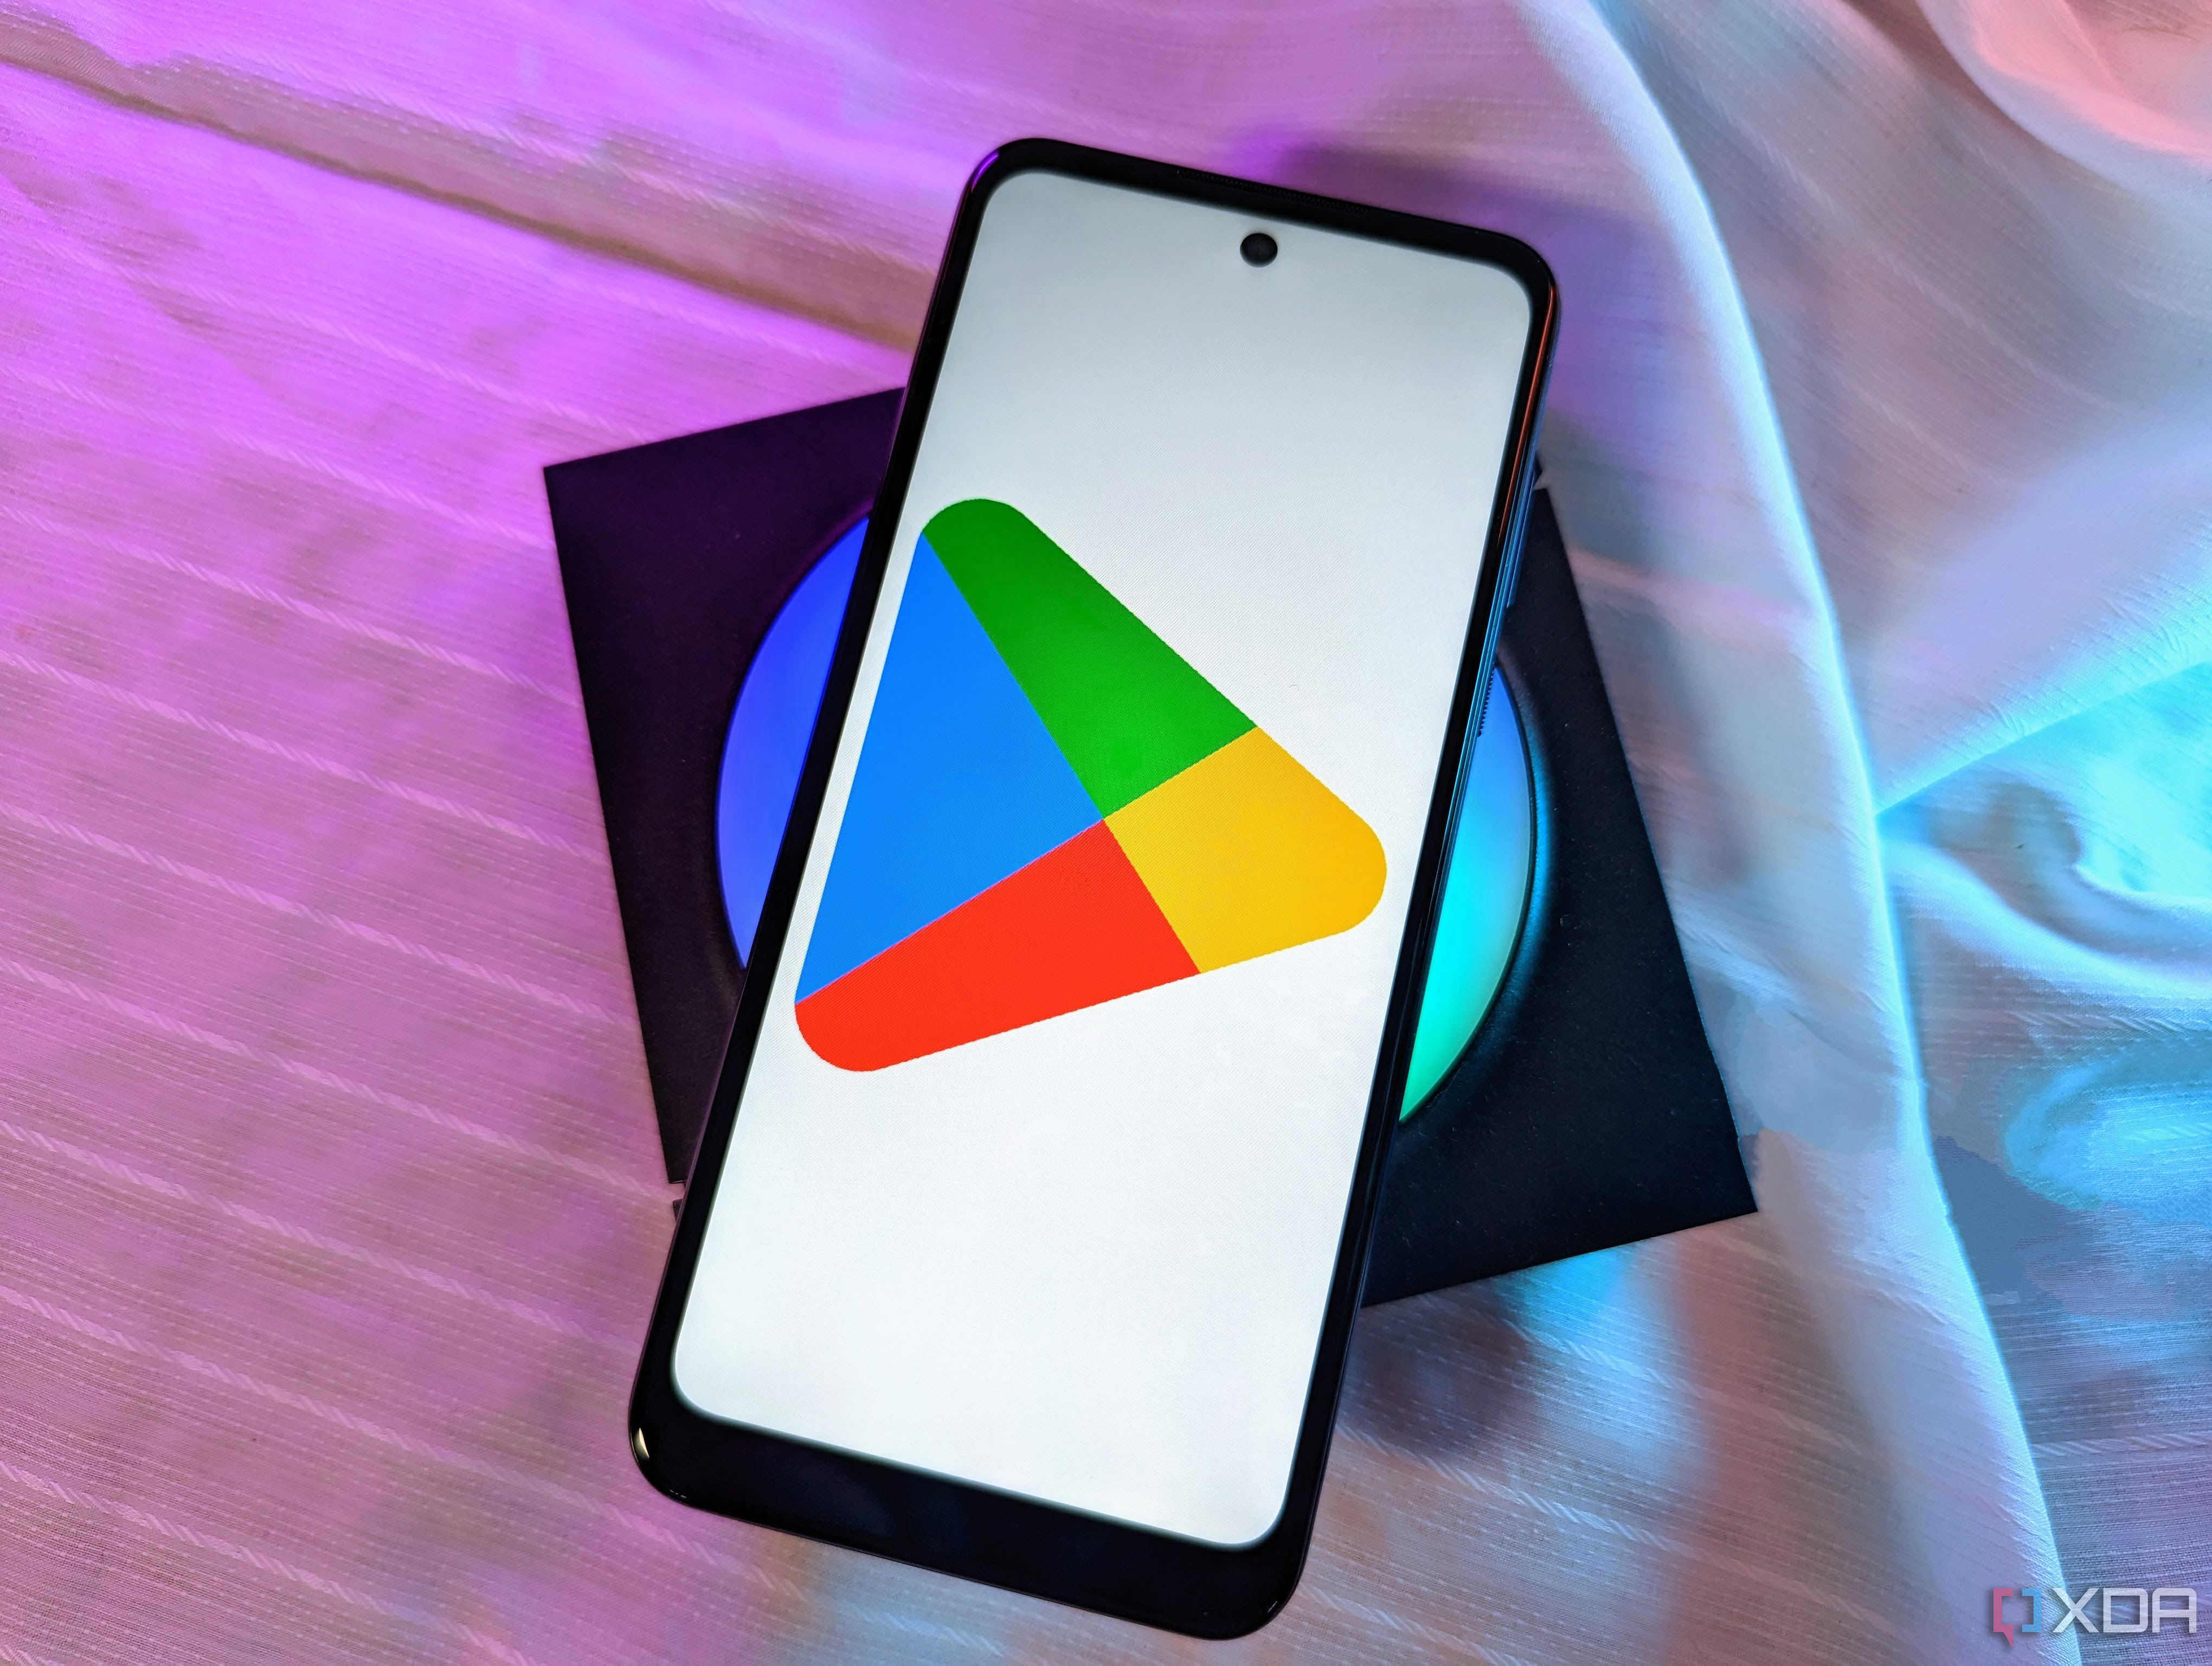 download large files over mobile data from play store